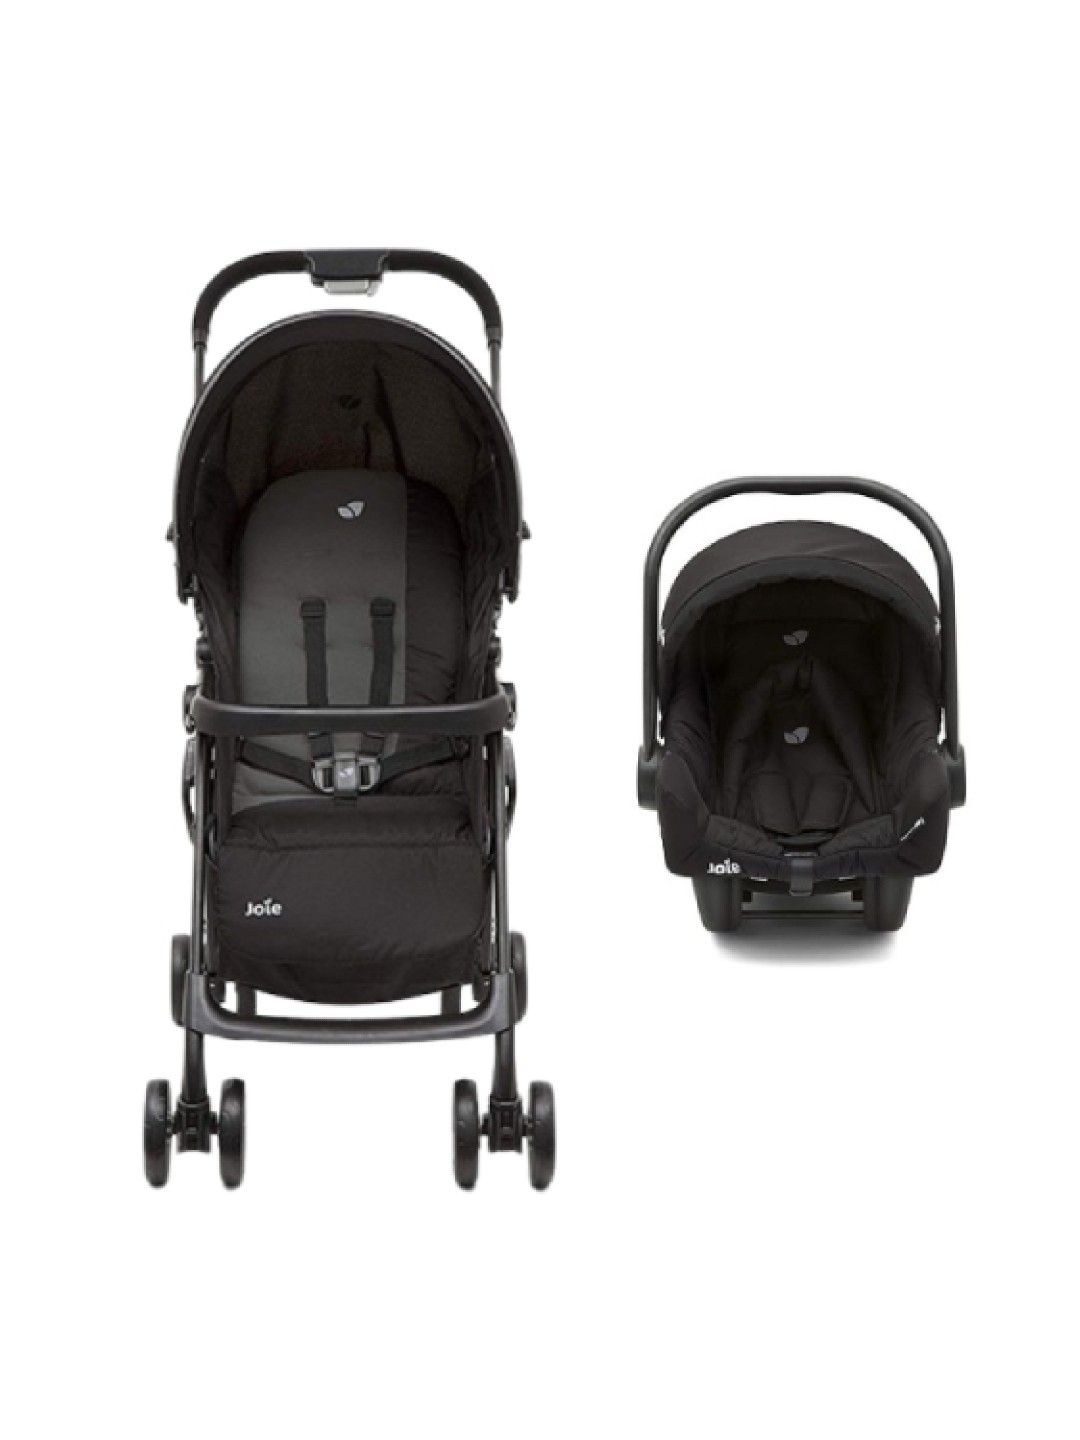 Joie Juva Travel System - Black Ink (Stroller with Car Seat)